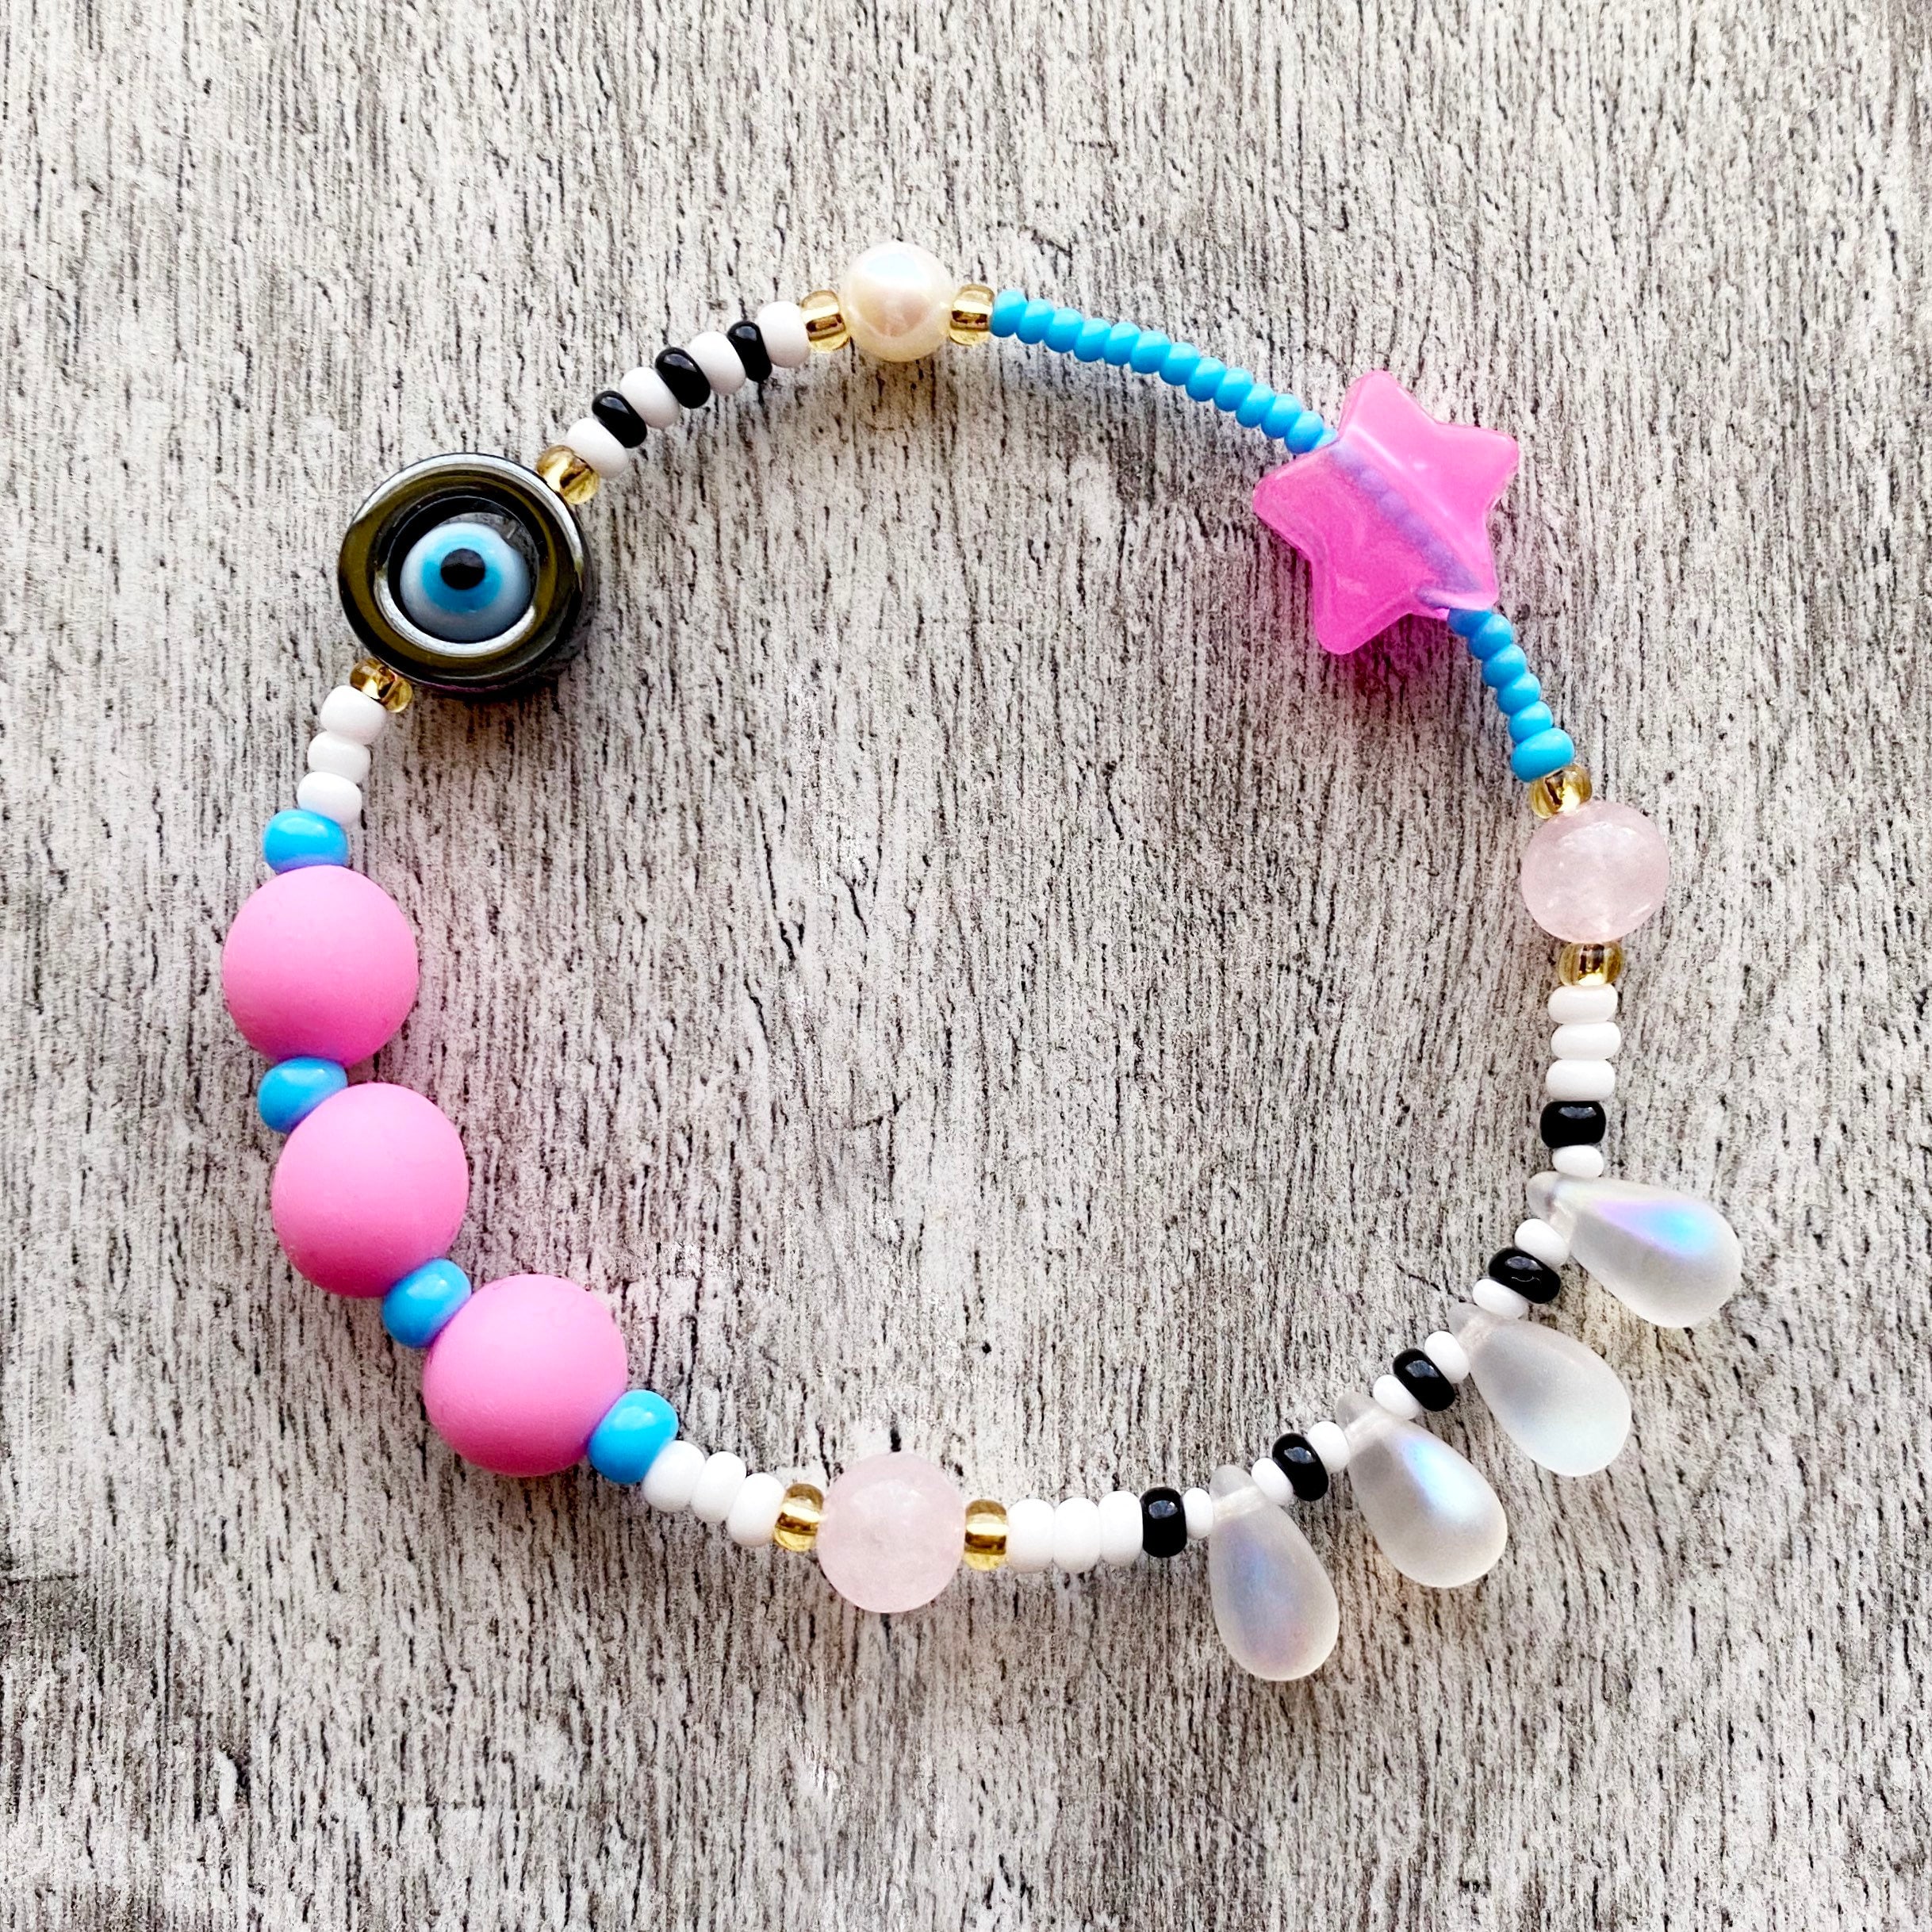 Clay Bead Bracelet - EVIL EYE STONE With Blue, White & Silver Accents HAND  MADE